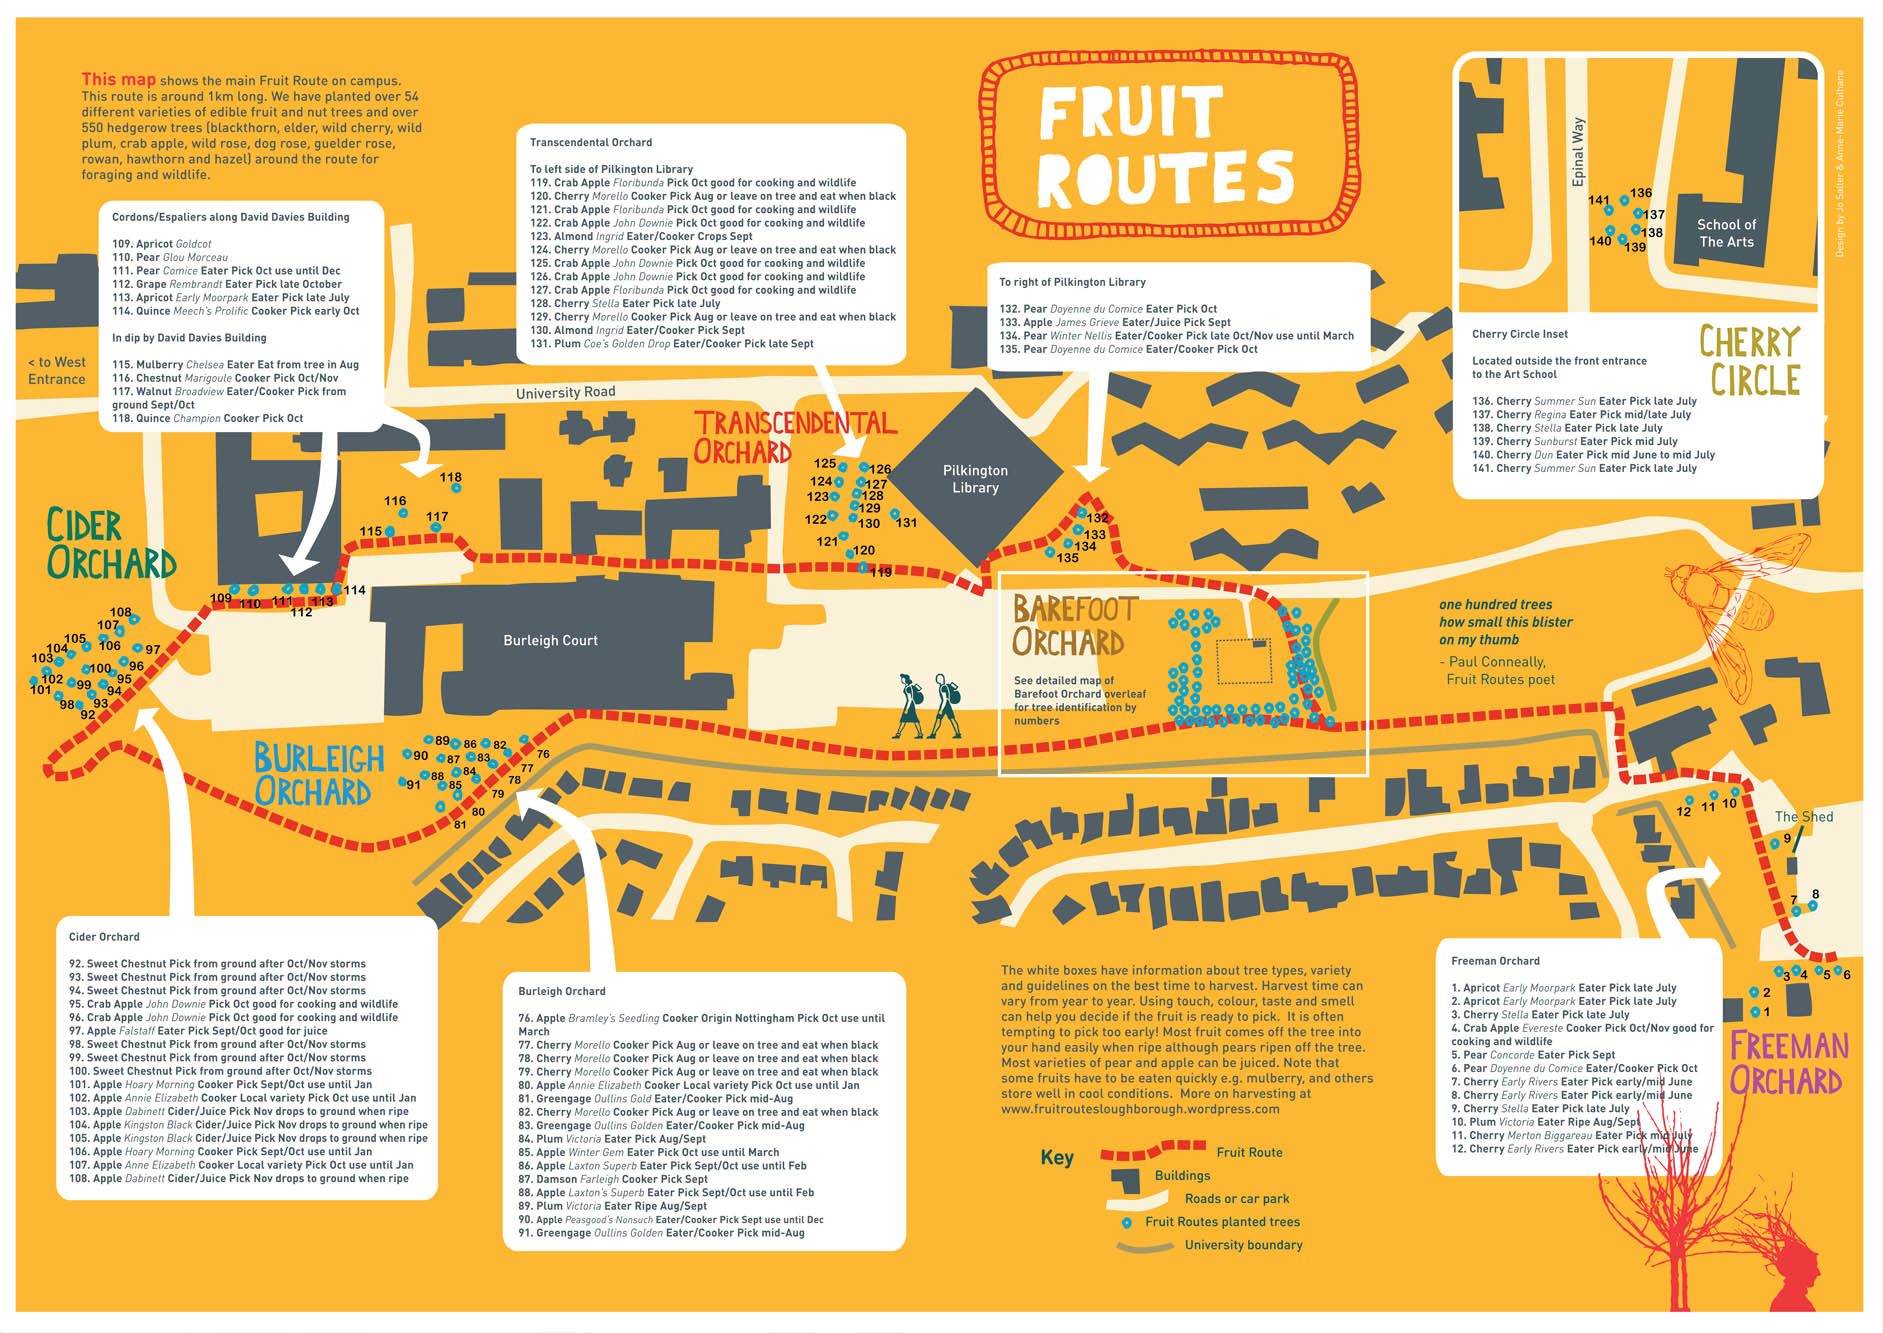 Fruit Routes Map route & trees